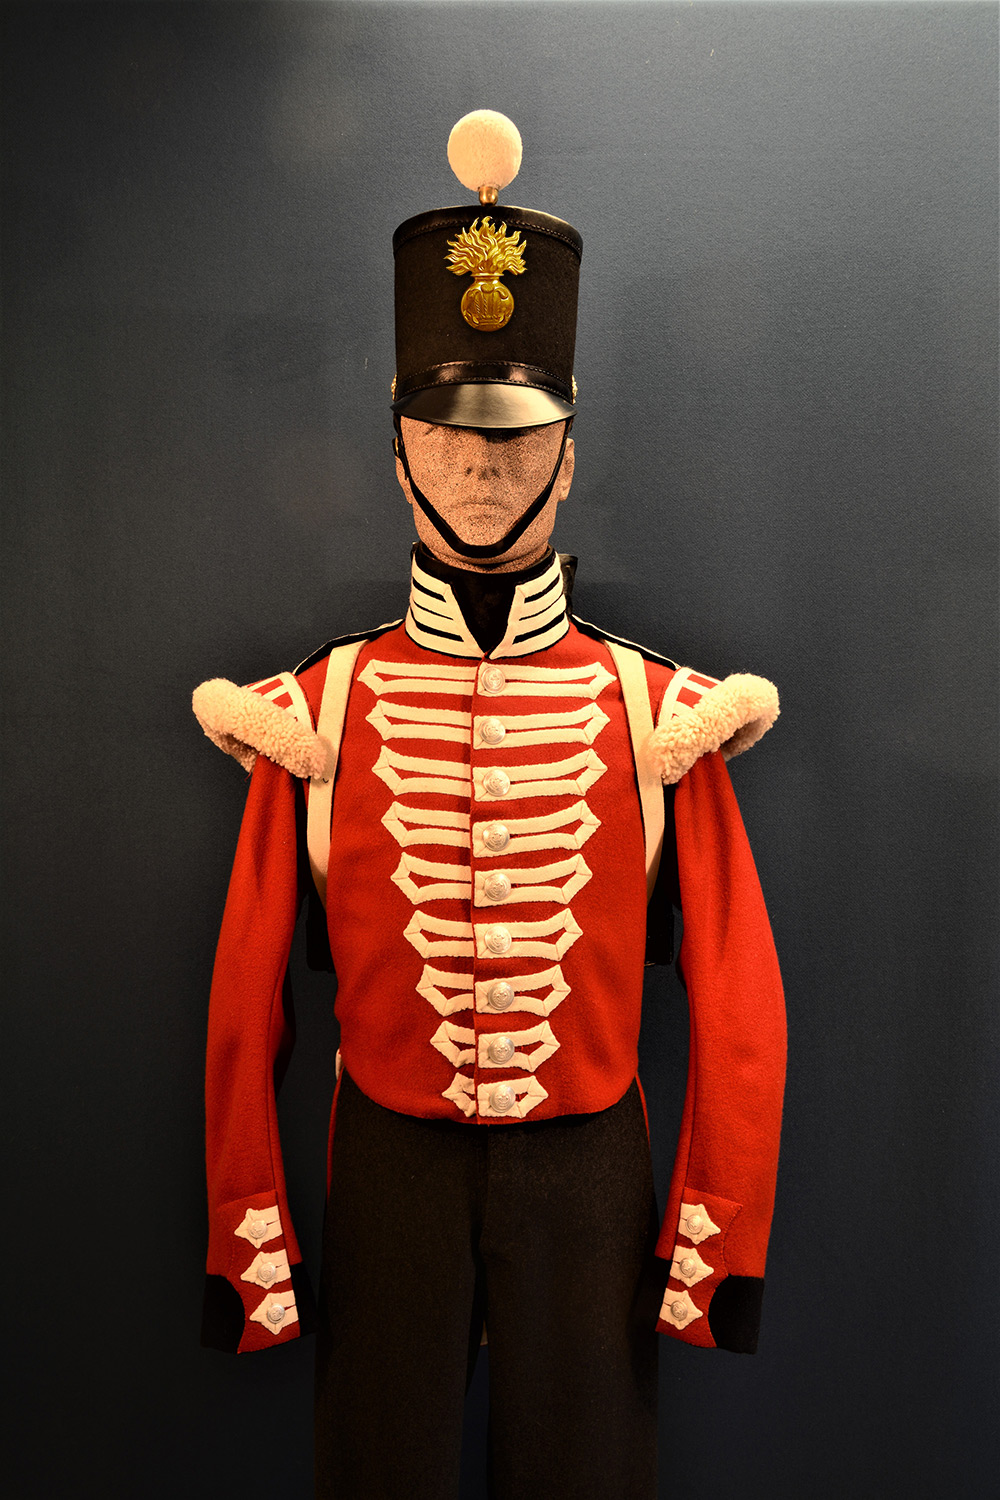 British, 23rd (Royal Welch Fusiliers) Regiment of Foot, 1854